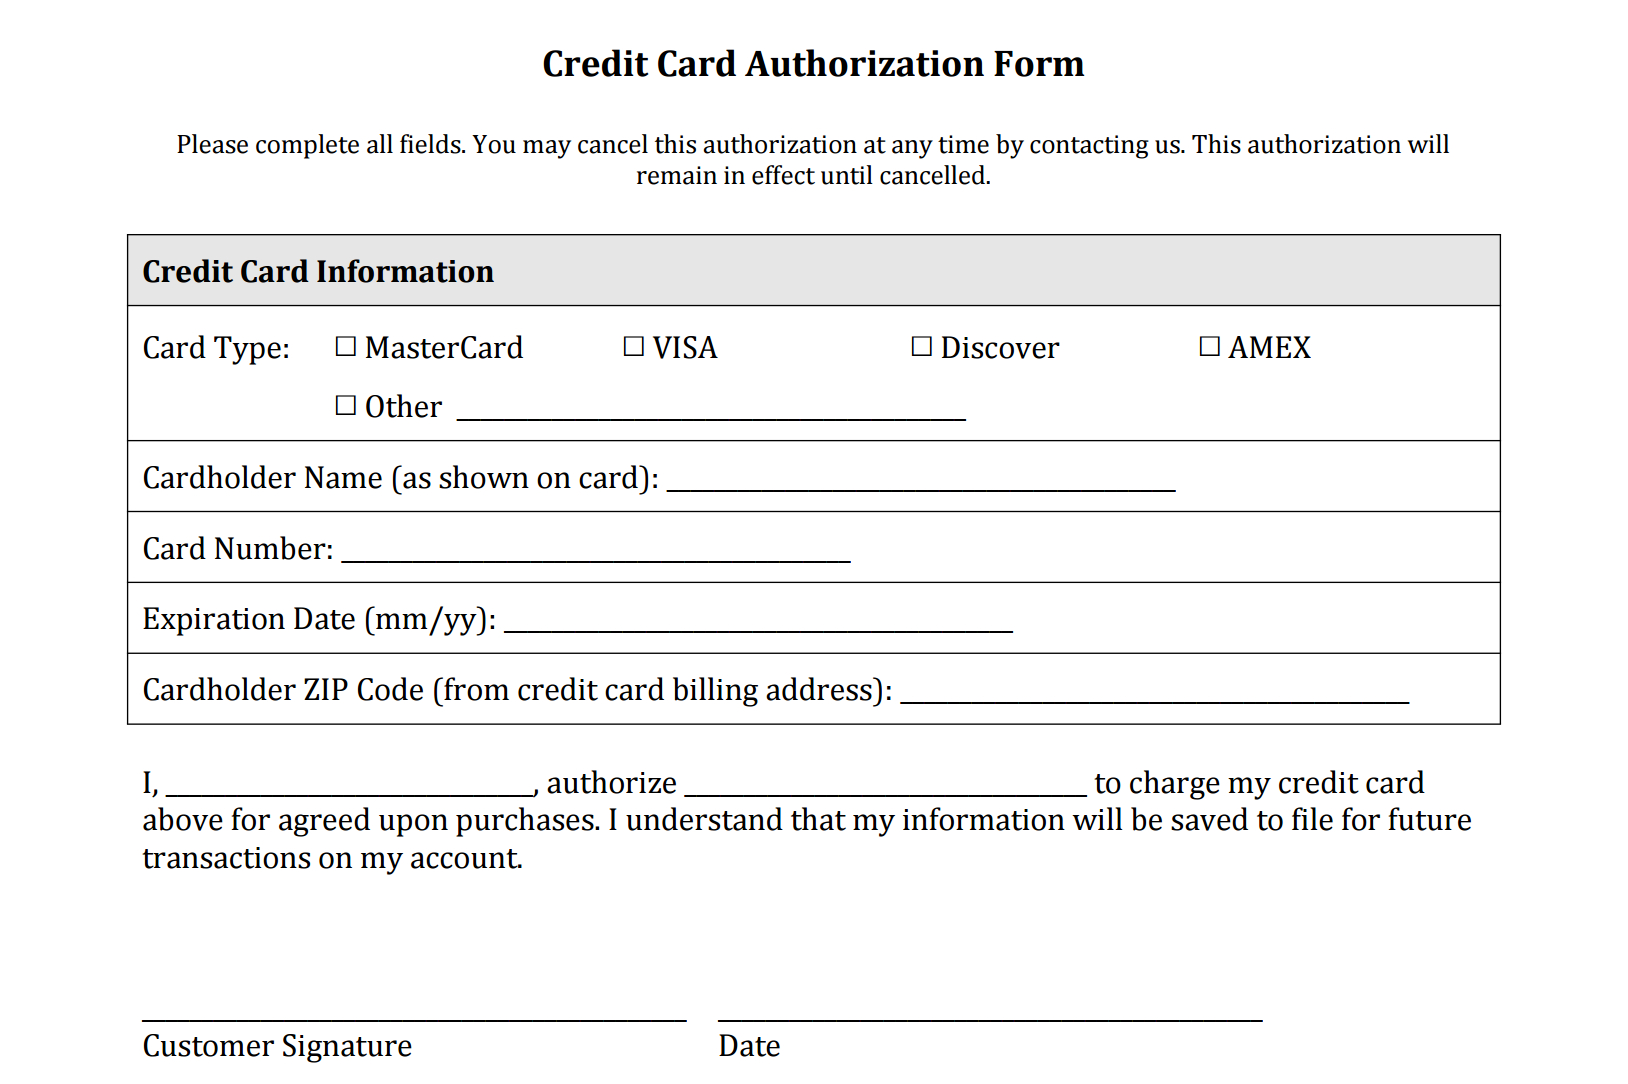 Credit Card Authorisation Form Template Australia - Calep Regarding Credit Card Authorisation Form Template Australia